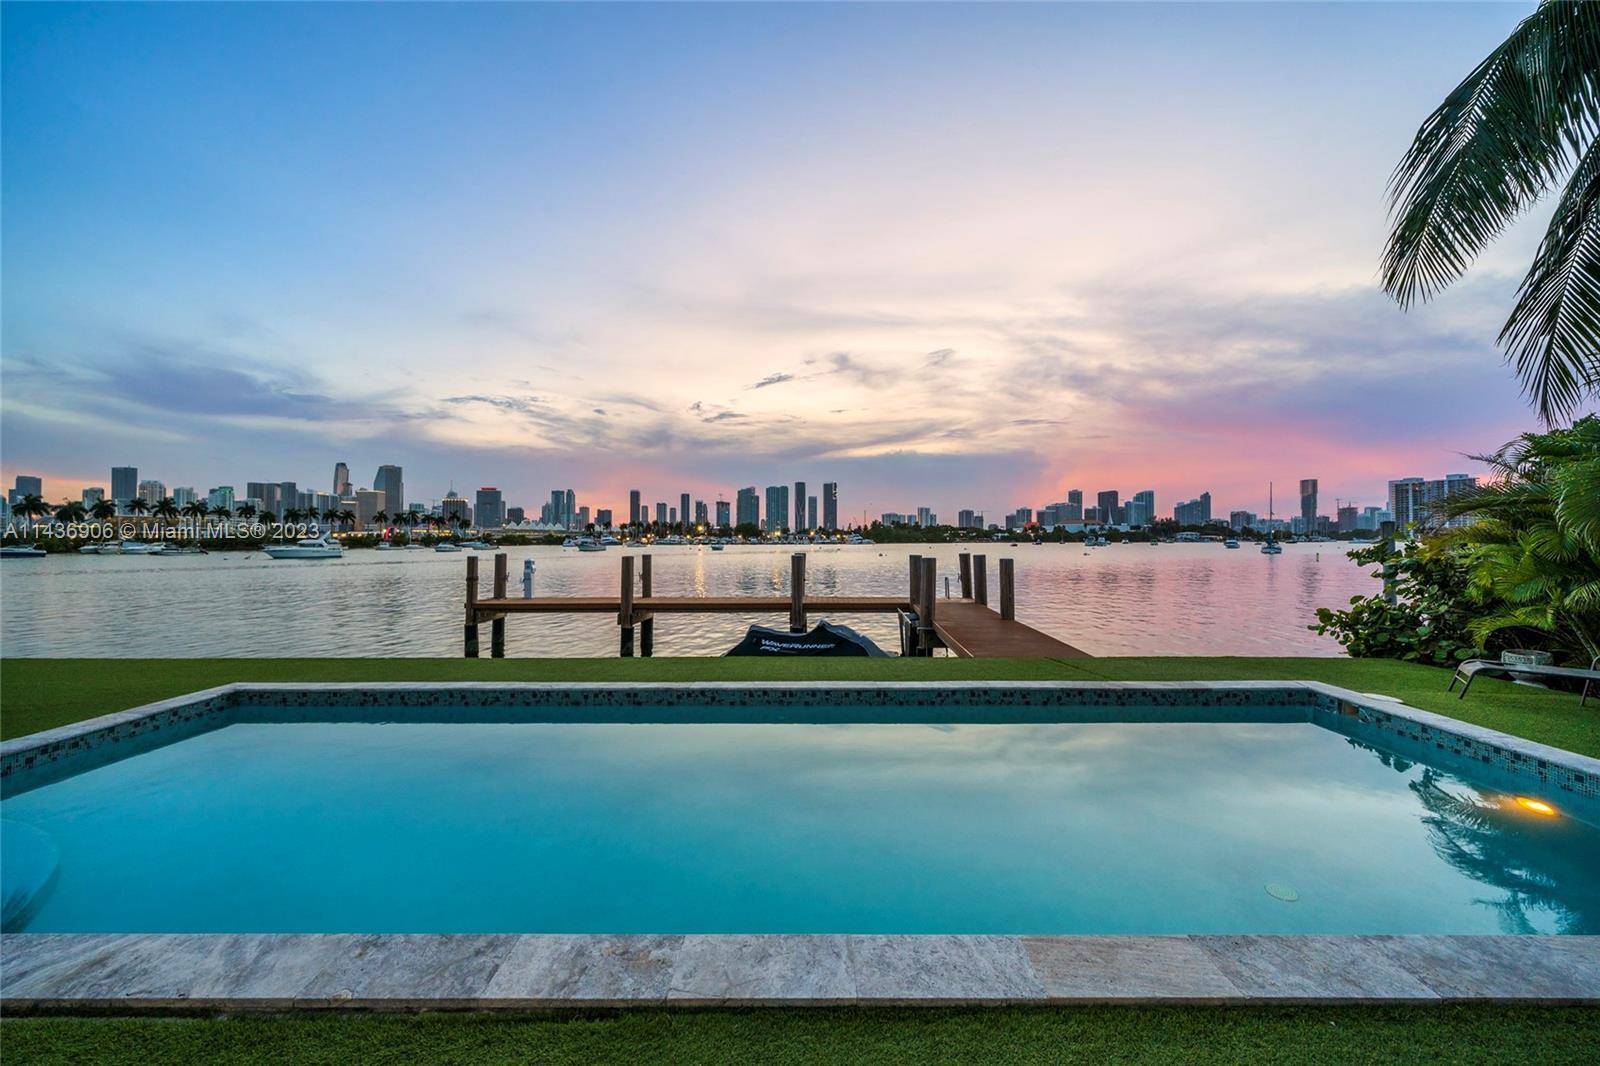 2 story waterfront home on the coveted Western tip of Palm Island offering stunning unobstructed views of the Miami Skyline Biscayne Bay.